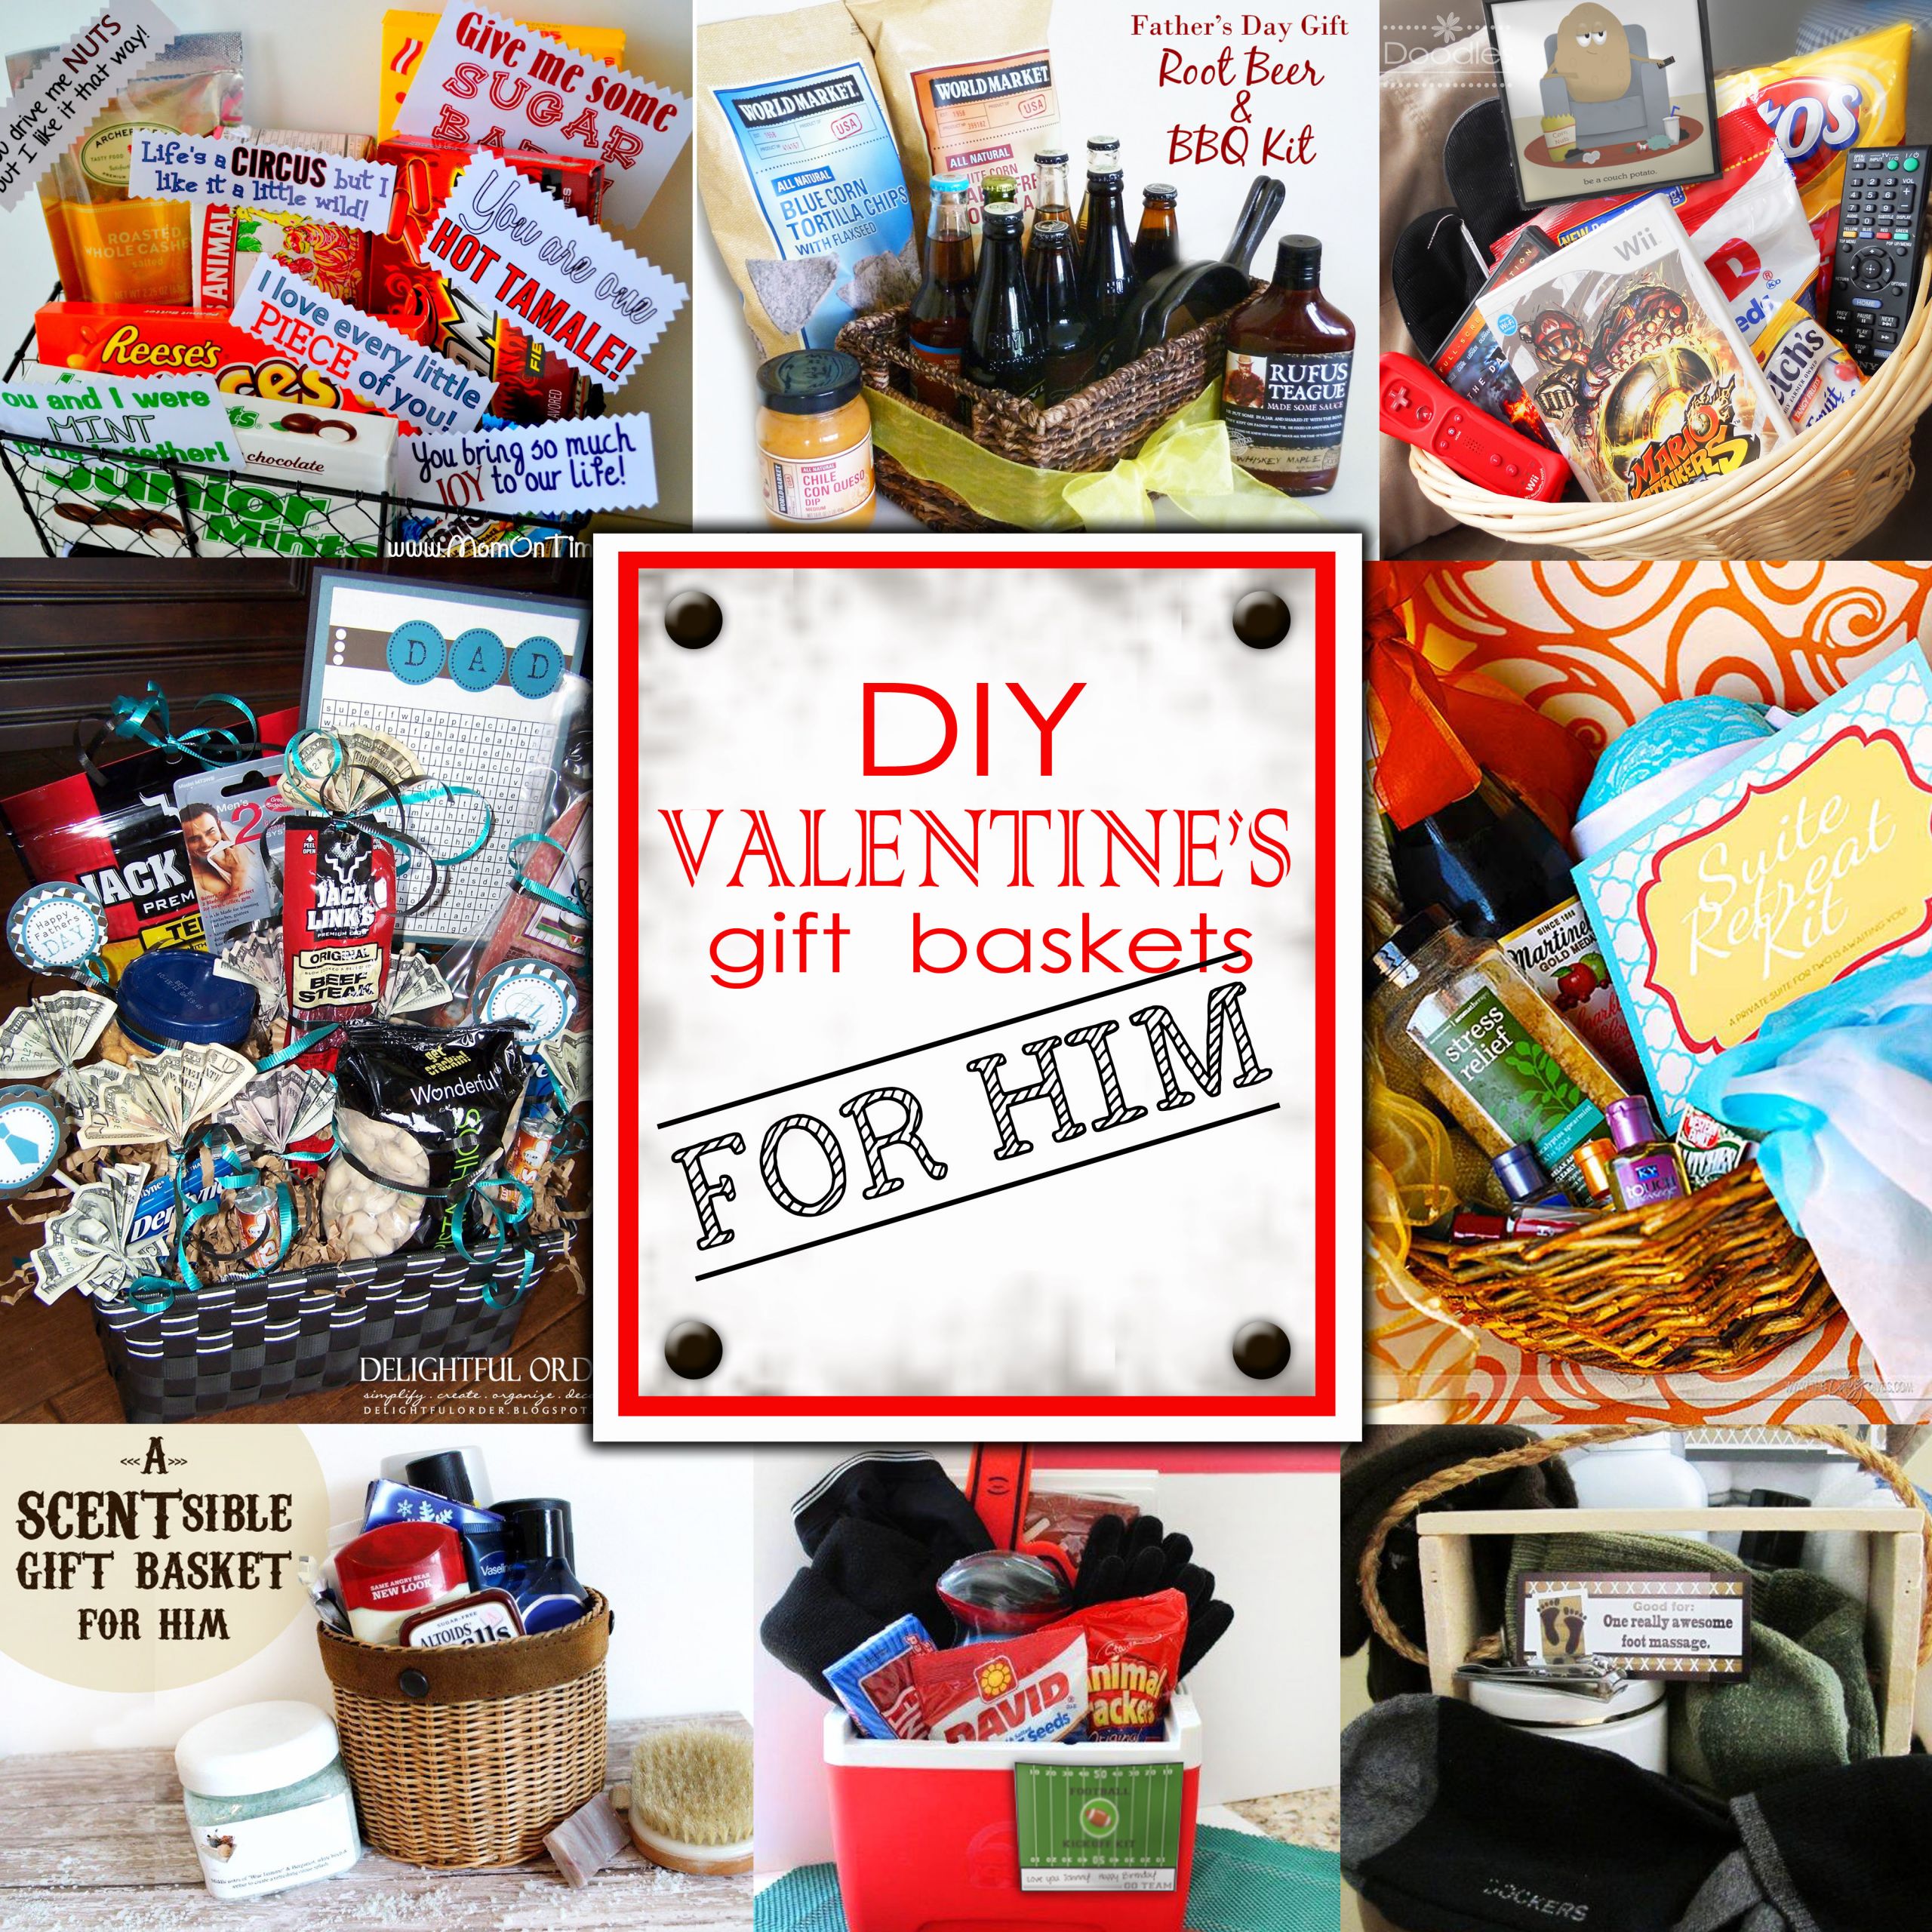 Valentines Day Gifts for Him Diy Awesome Diy Valentine S Day Gift Baskets for Him Darling Doodles